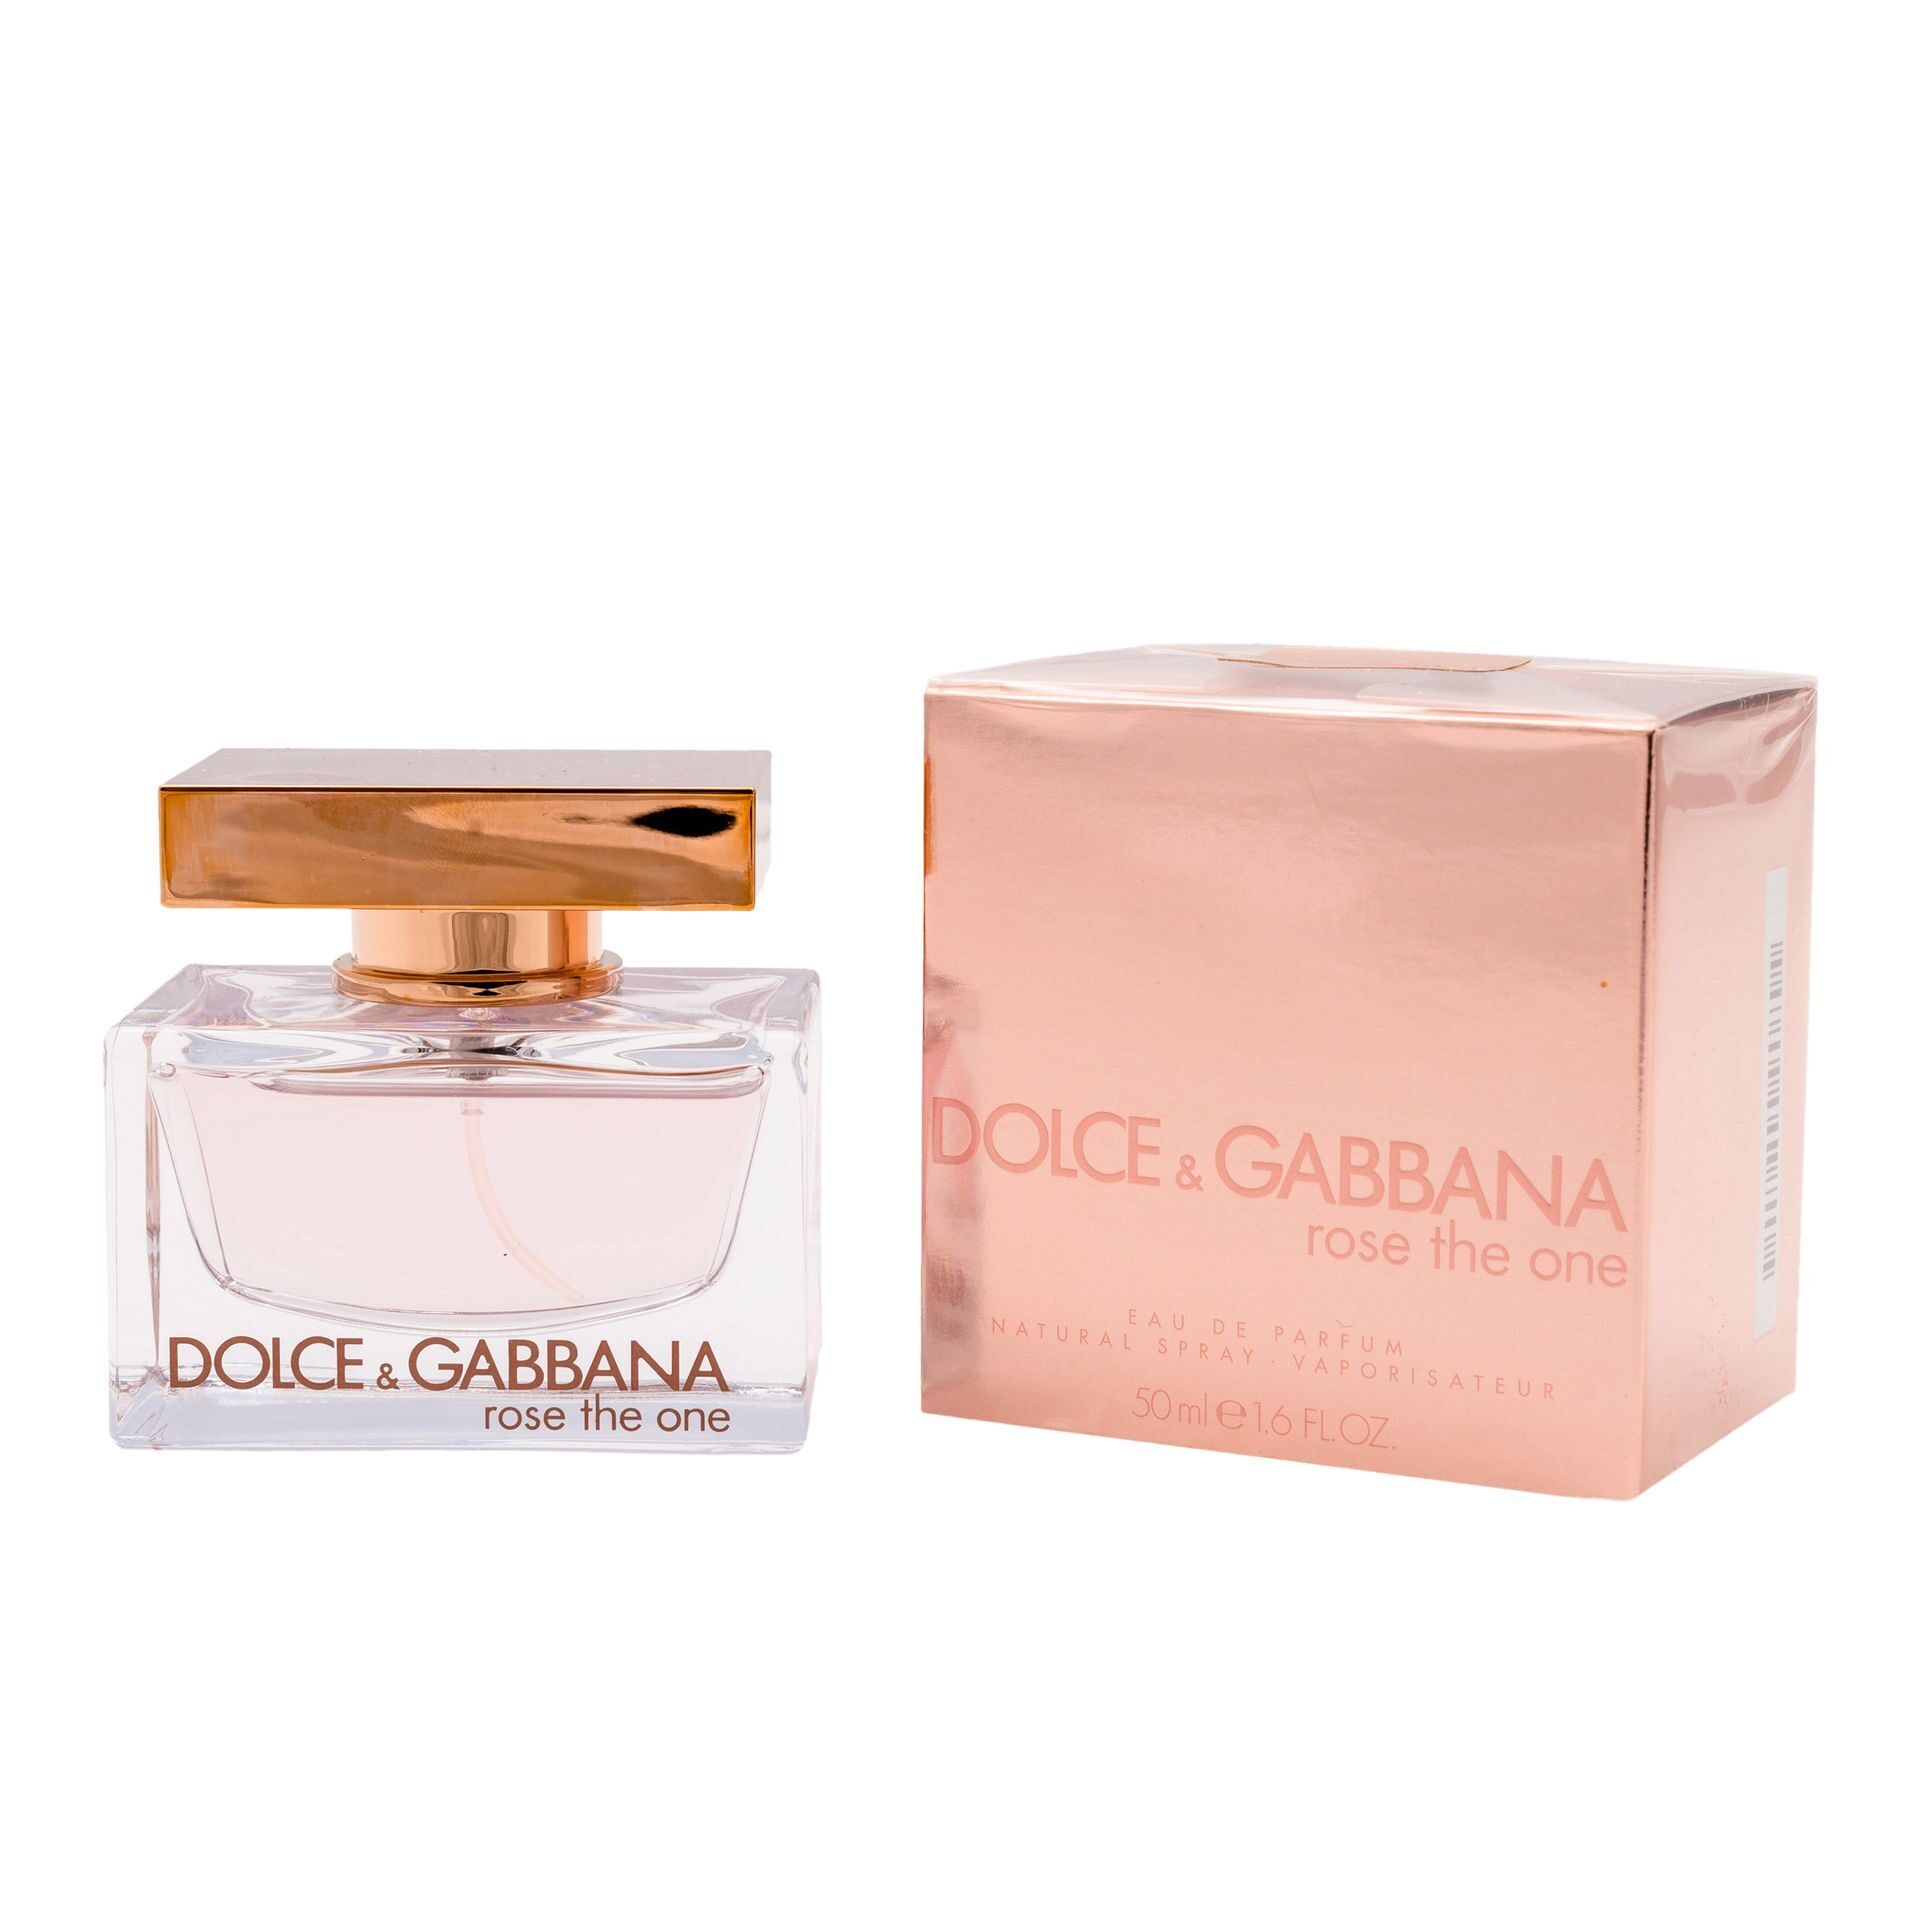 dolce and gabbana rose the one